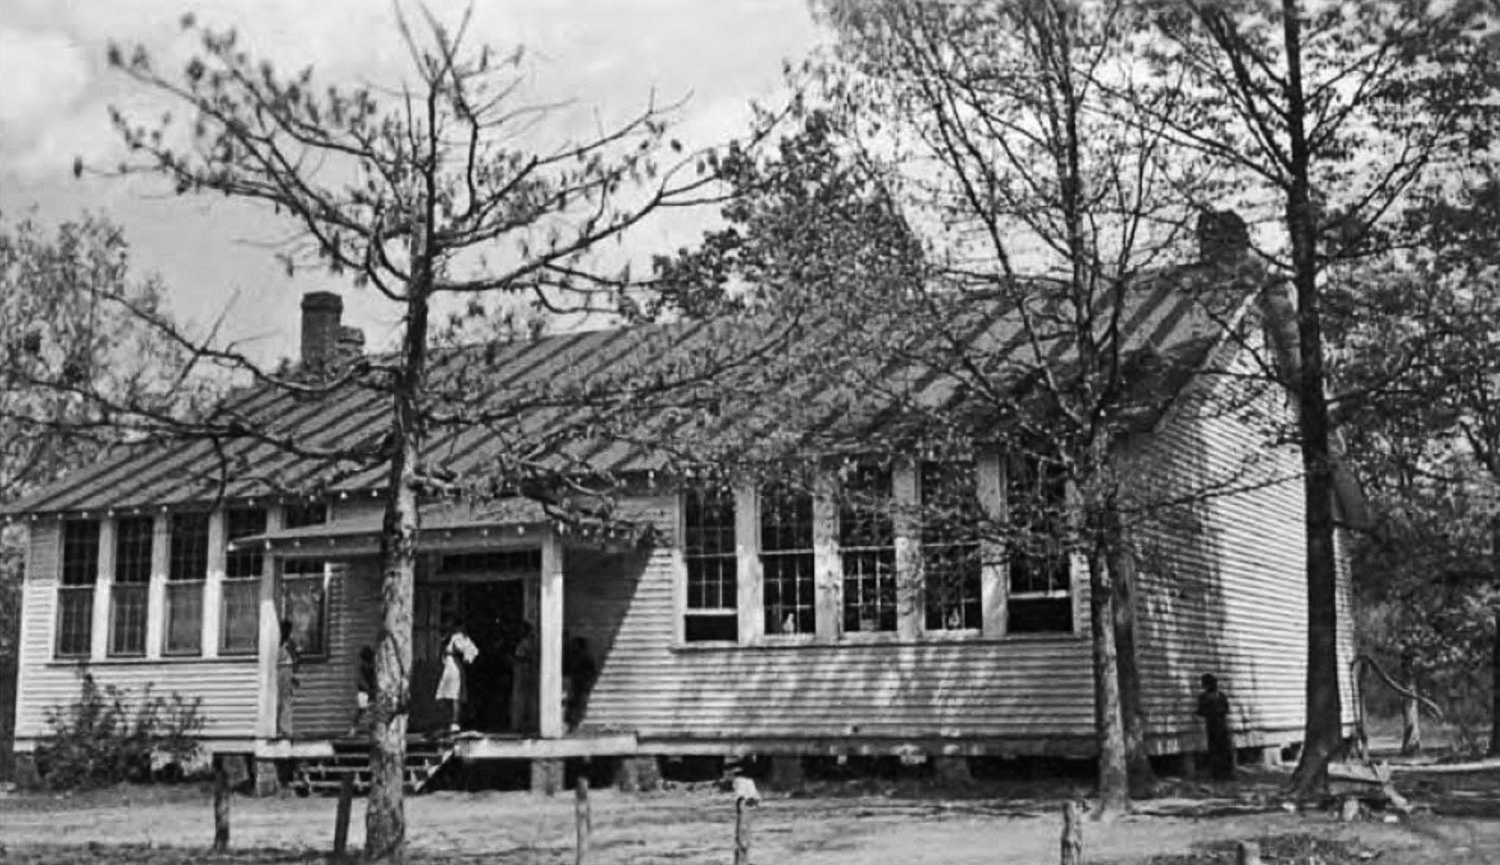 What Can the Rosenwald Schools Teach Us?